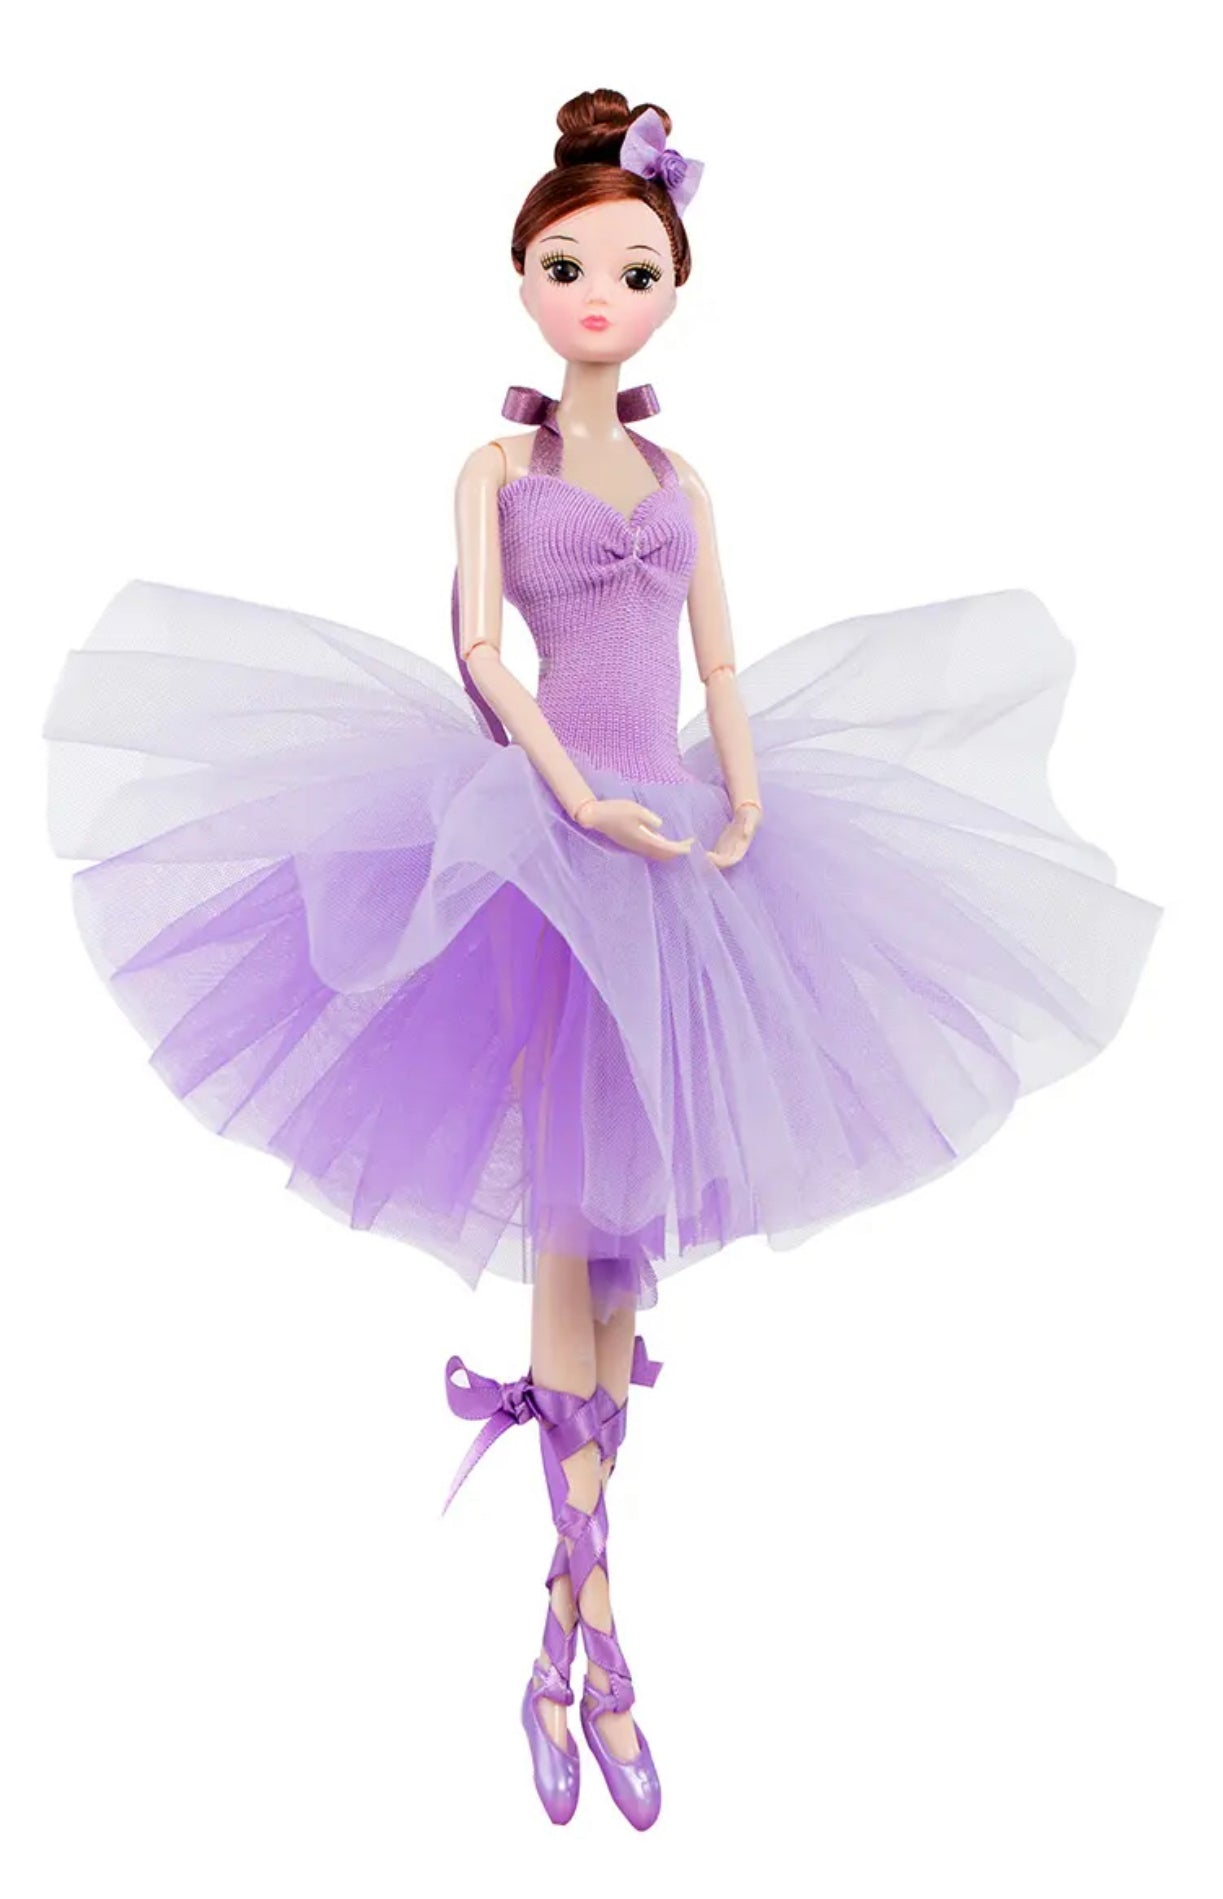 DOLLY® BALLERINA DOLL WITH PURPLE TUTU DRESS - Bjd 12 joints 12 inch 30 cm 1/6 scale fashion doll